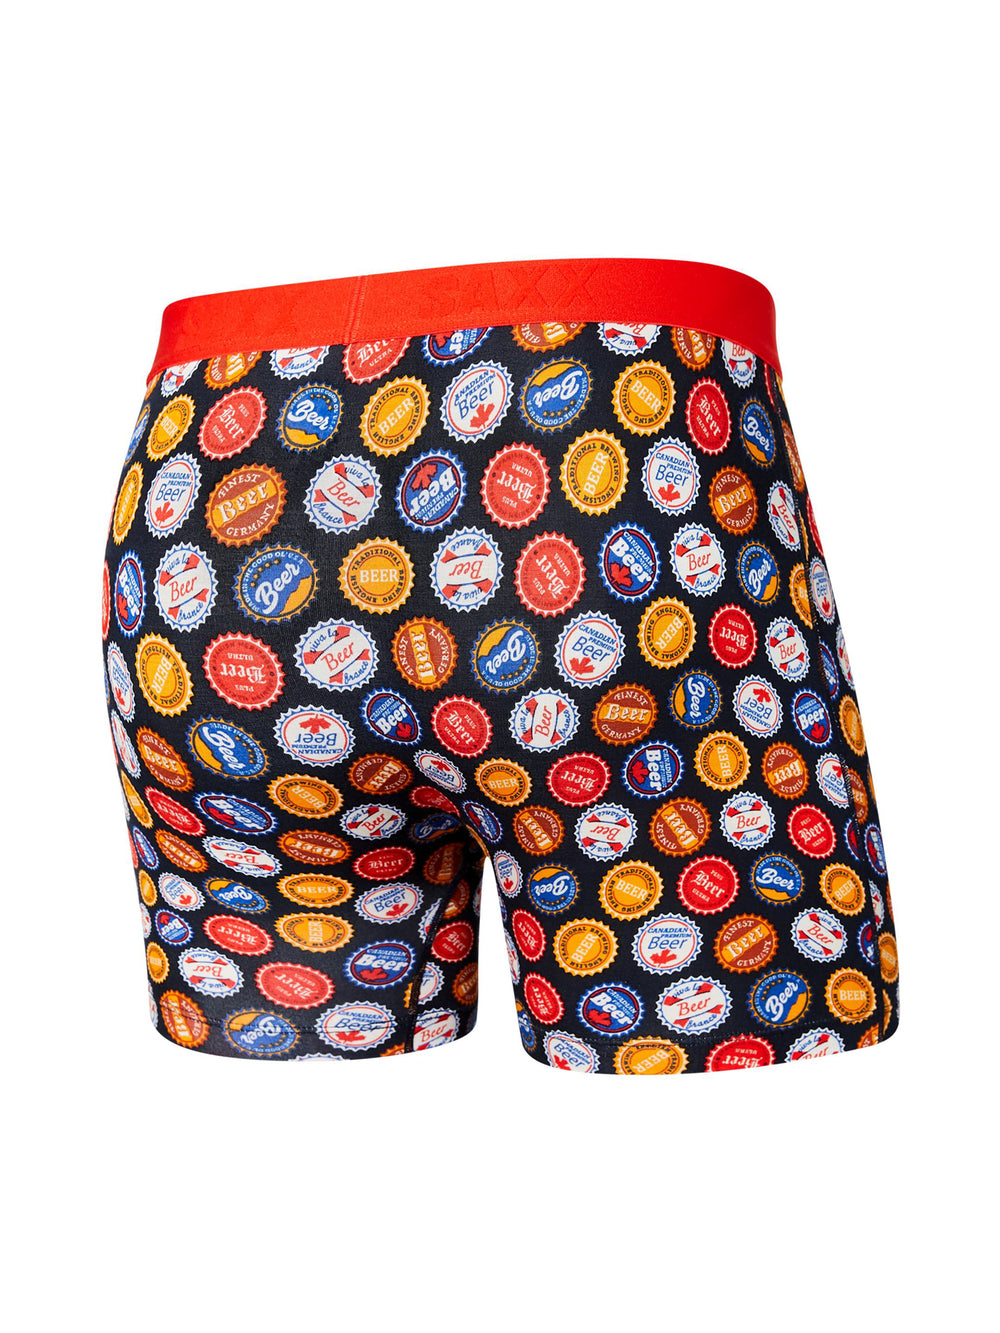 SAXX ULTRA BOXER BRIEF- BEERS OF THE WORLD